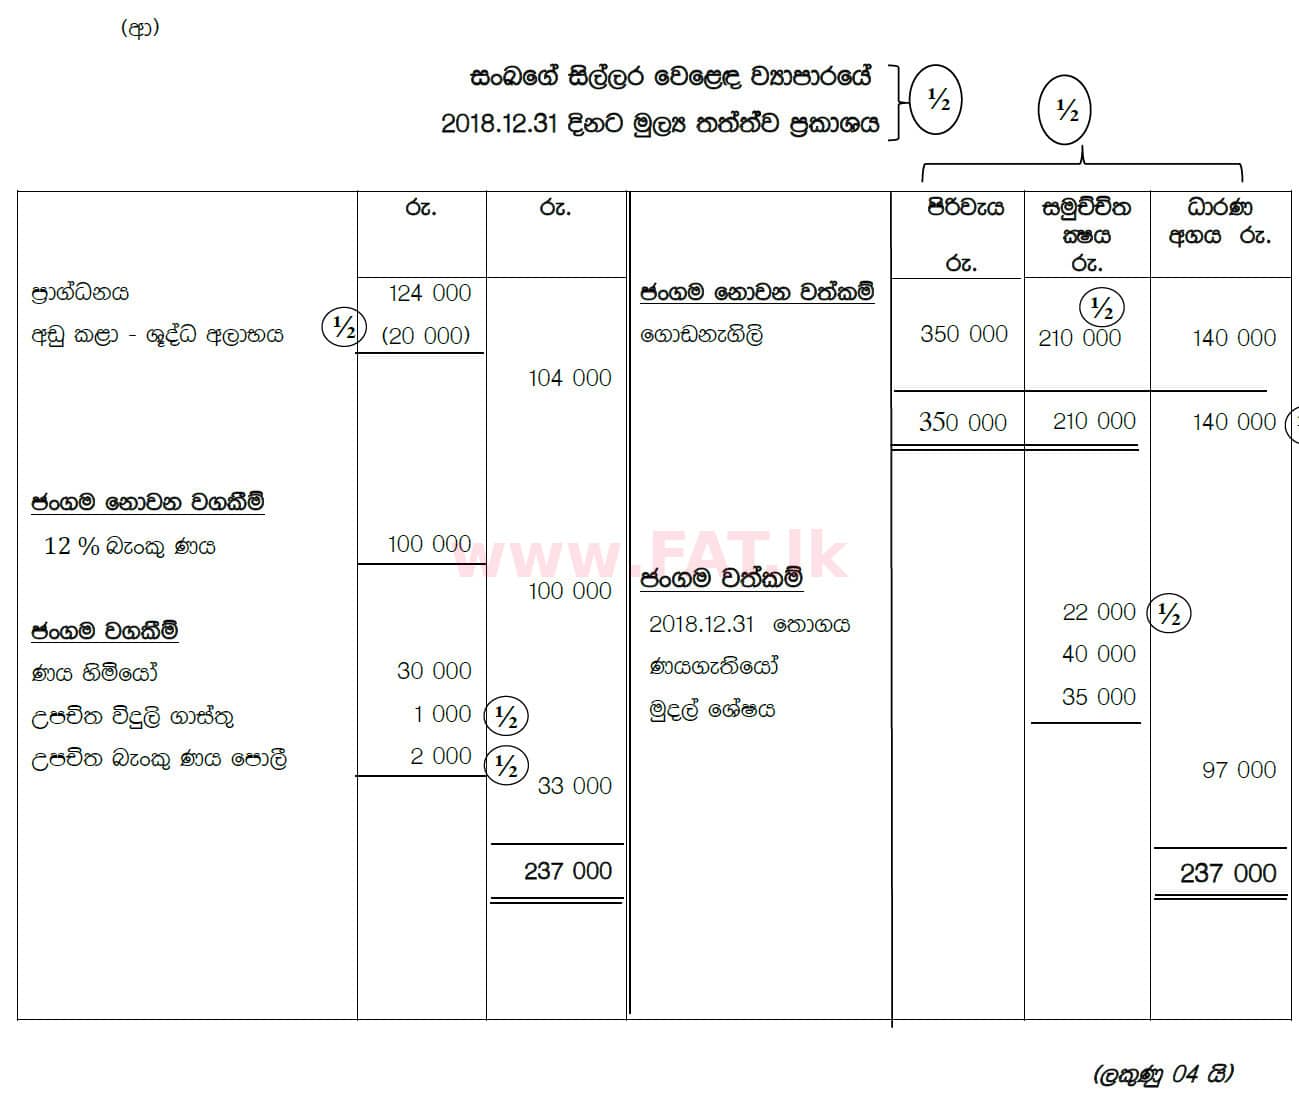 National Syllabus : Ordinary Level (O/L) Business and Accounting Studies - 2019 March - Paper II (සිංහල Medium) 7 5902